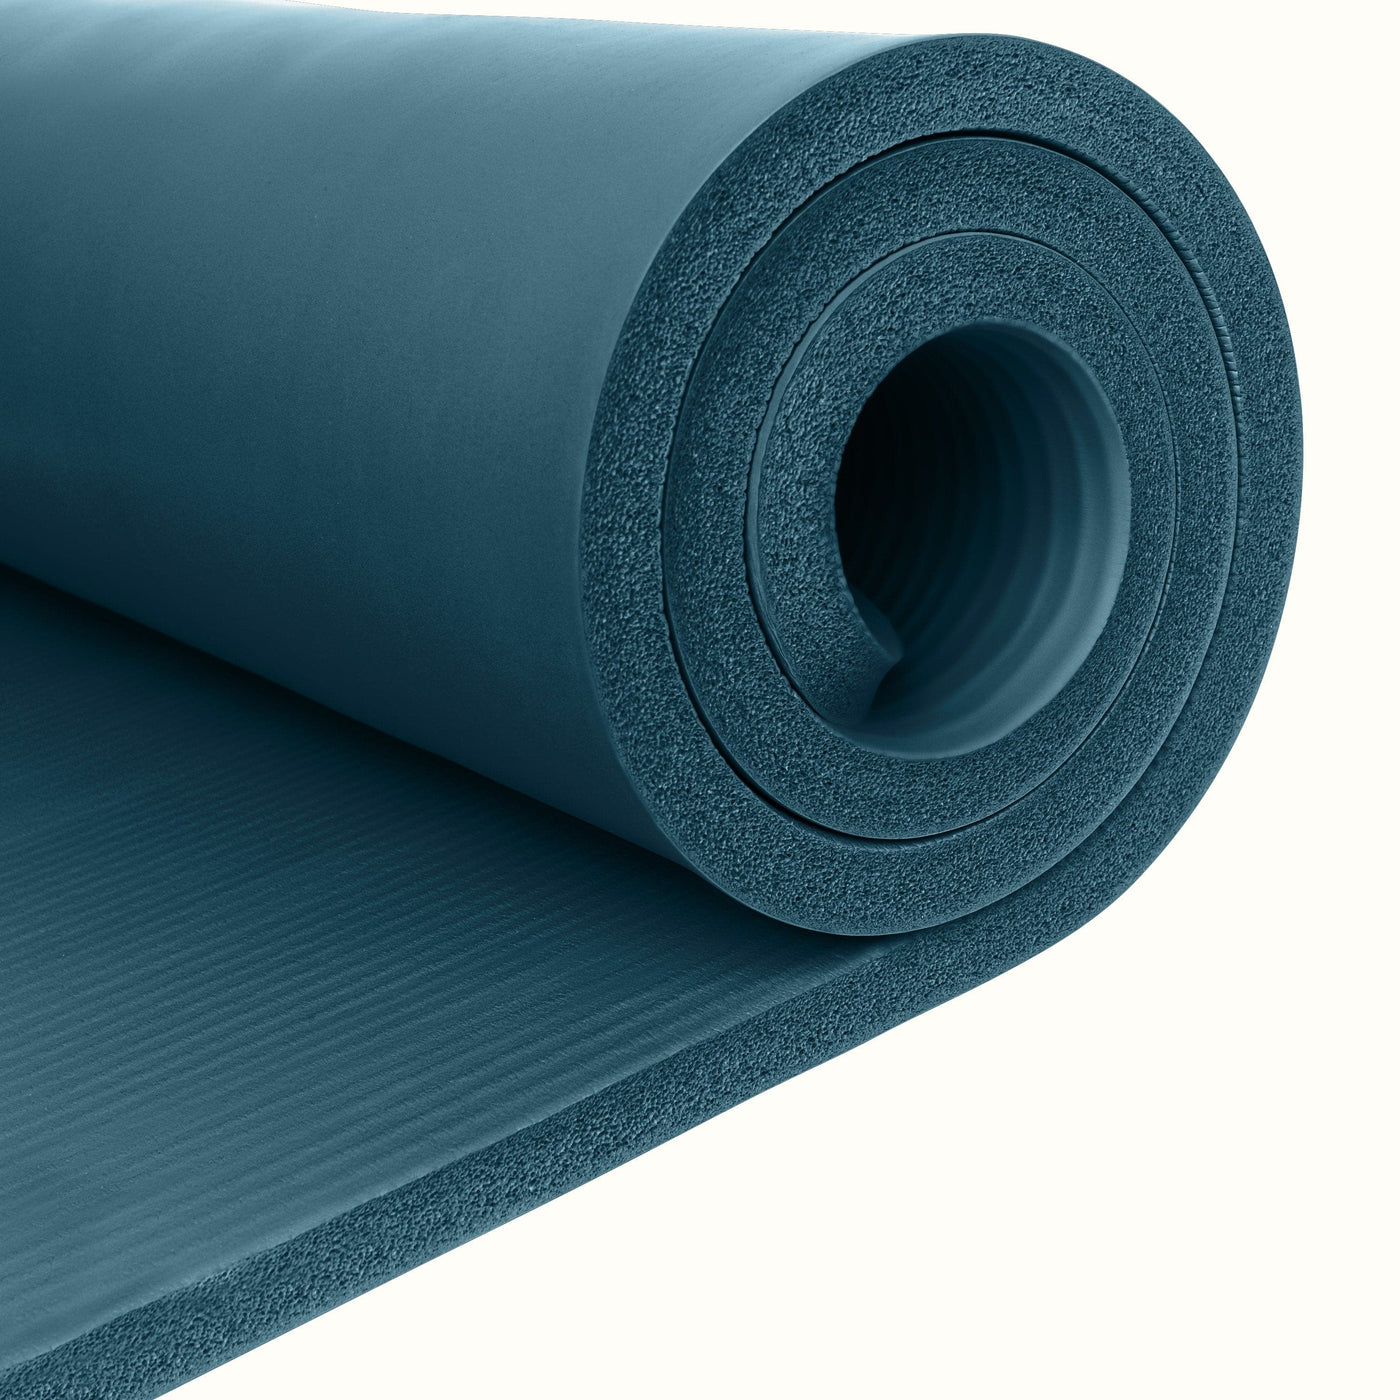 Buy Xpeed Multi Pvc , Foam Yoga mat - 1 pc Online at Low Prices in